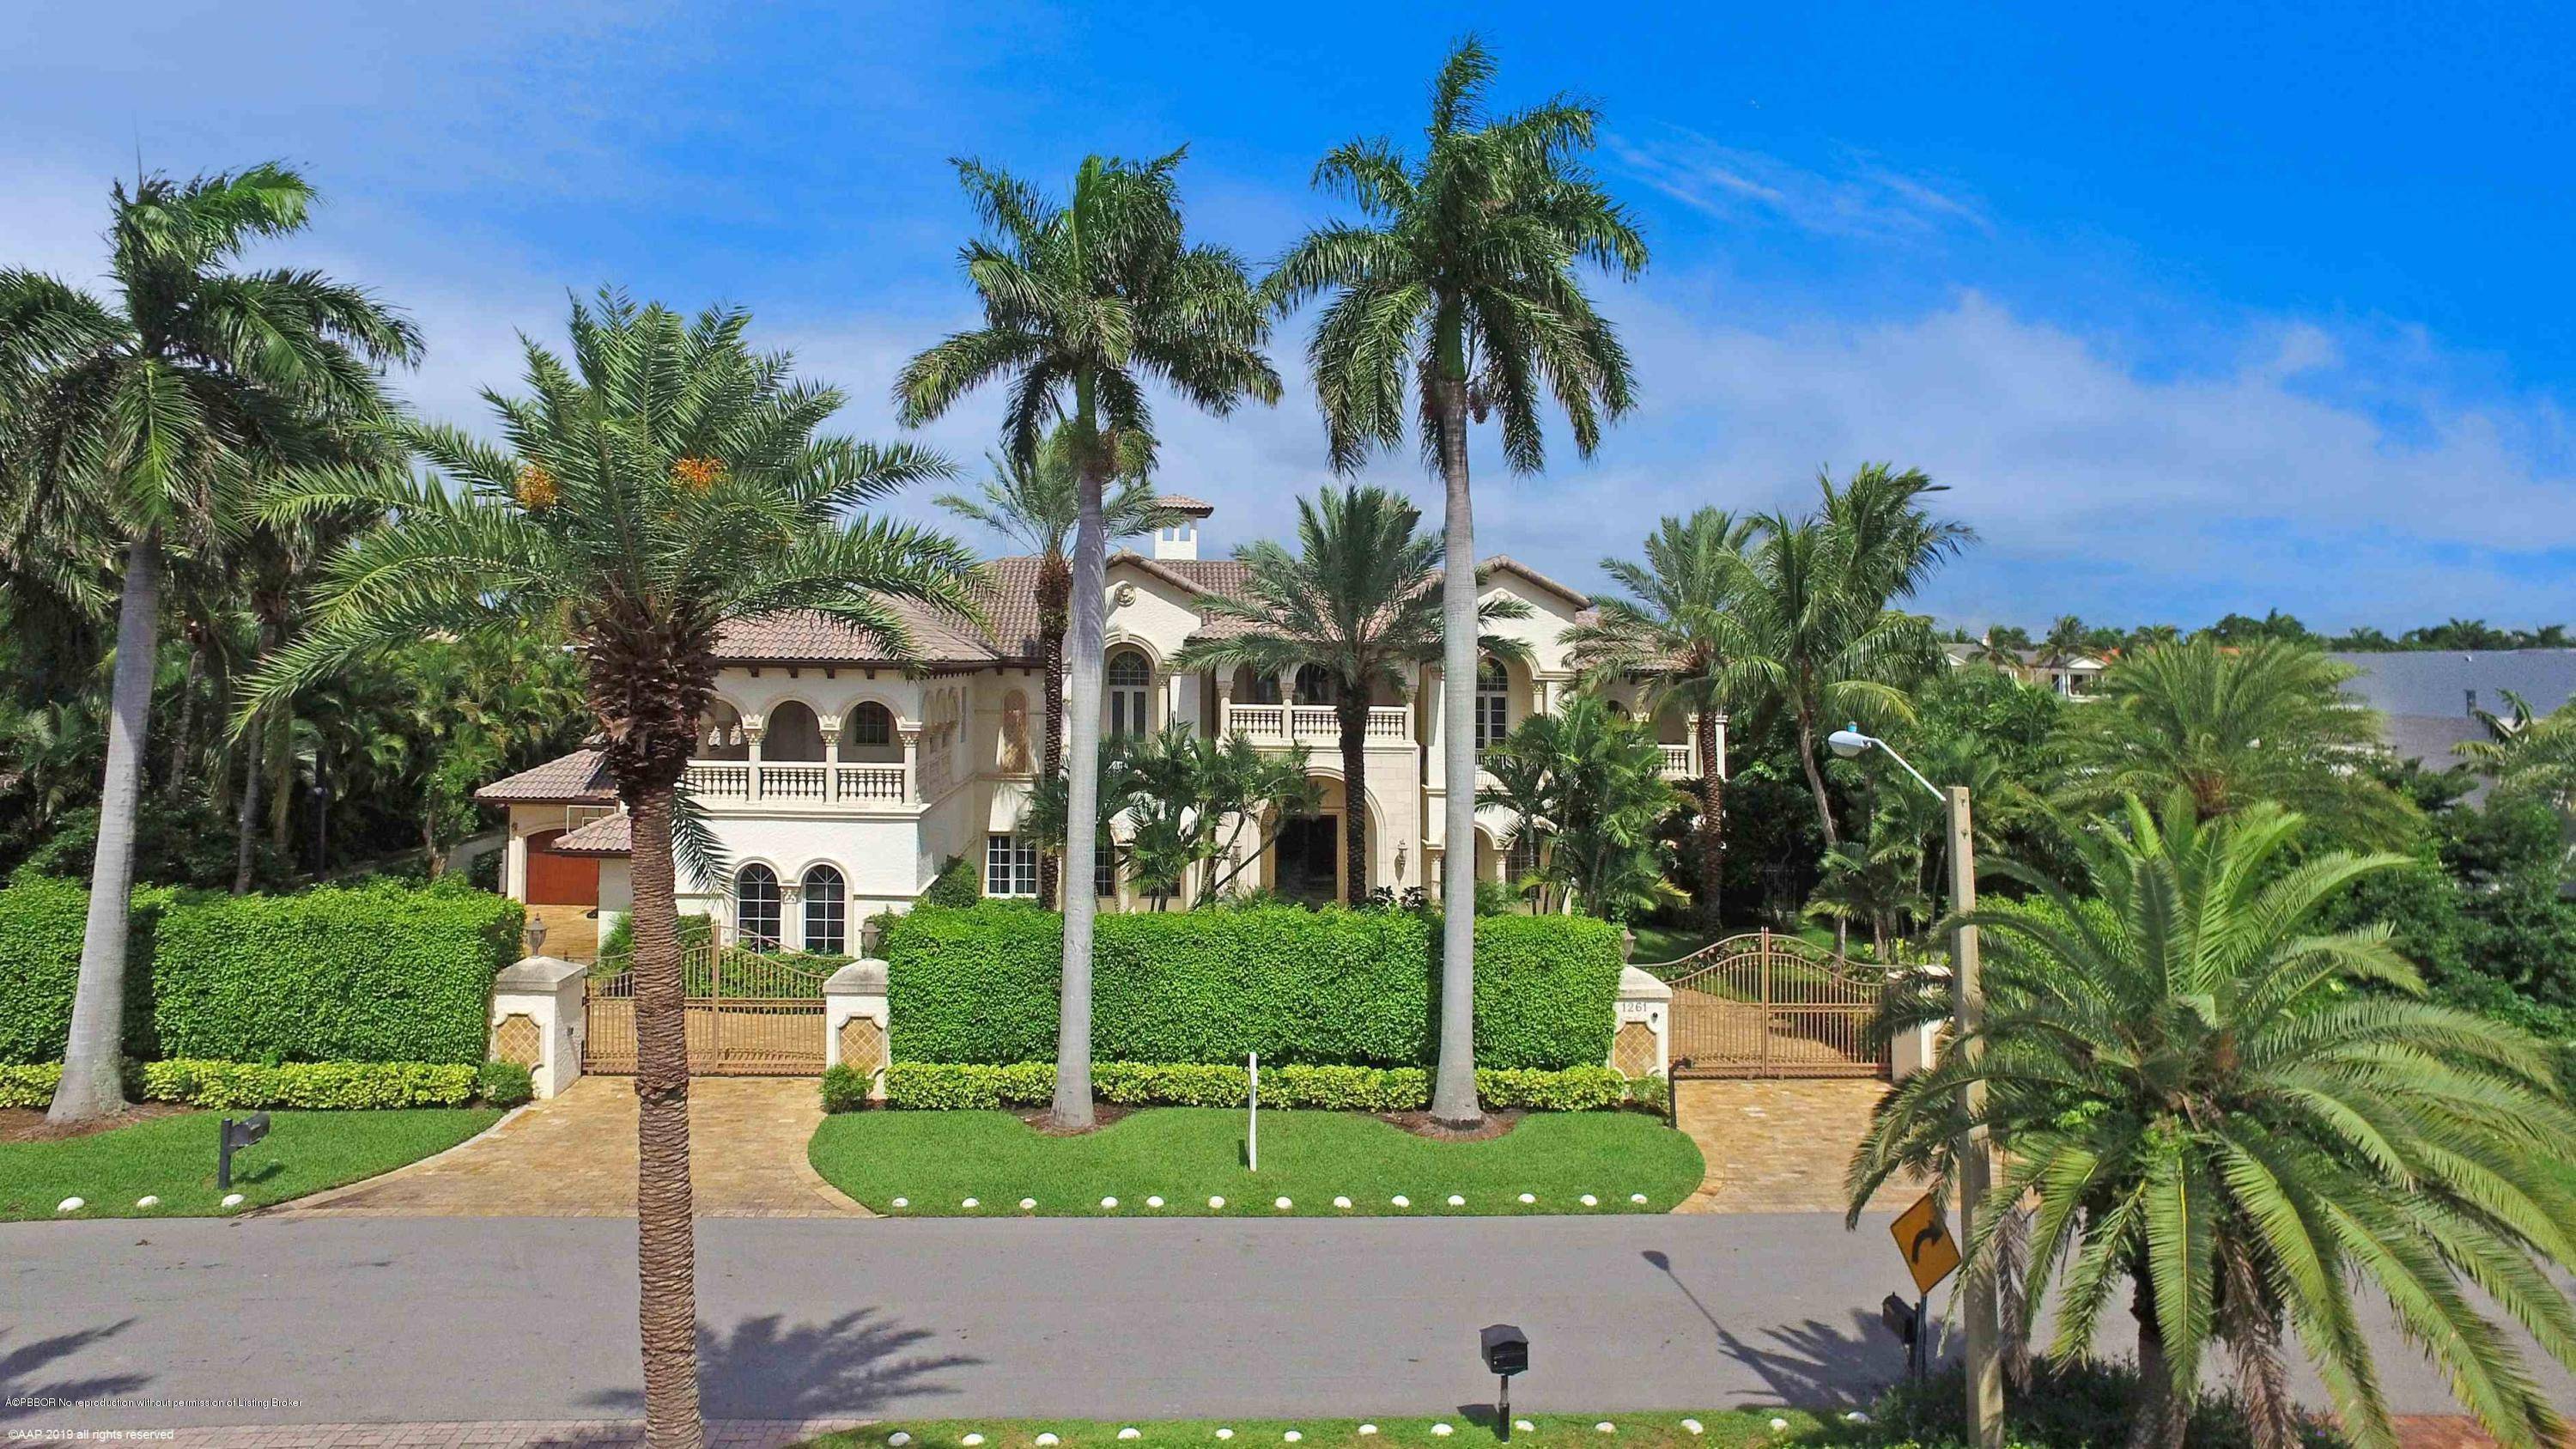 This 15, 883sf gated Mediterranean Spanish Estate is complete and ready for the next homeowner, with 140' of beautiful Intracoastal waterfrontage and sitting on over 1 2 acre, maintained to ...